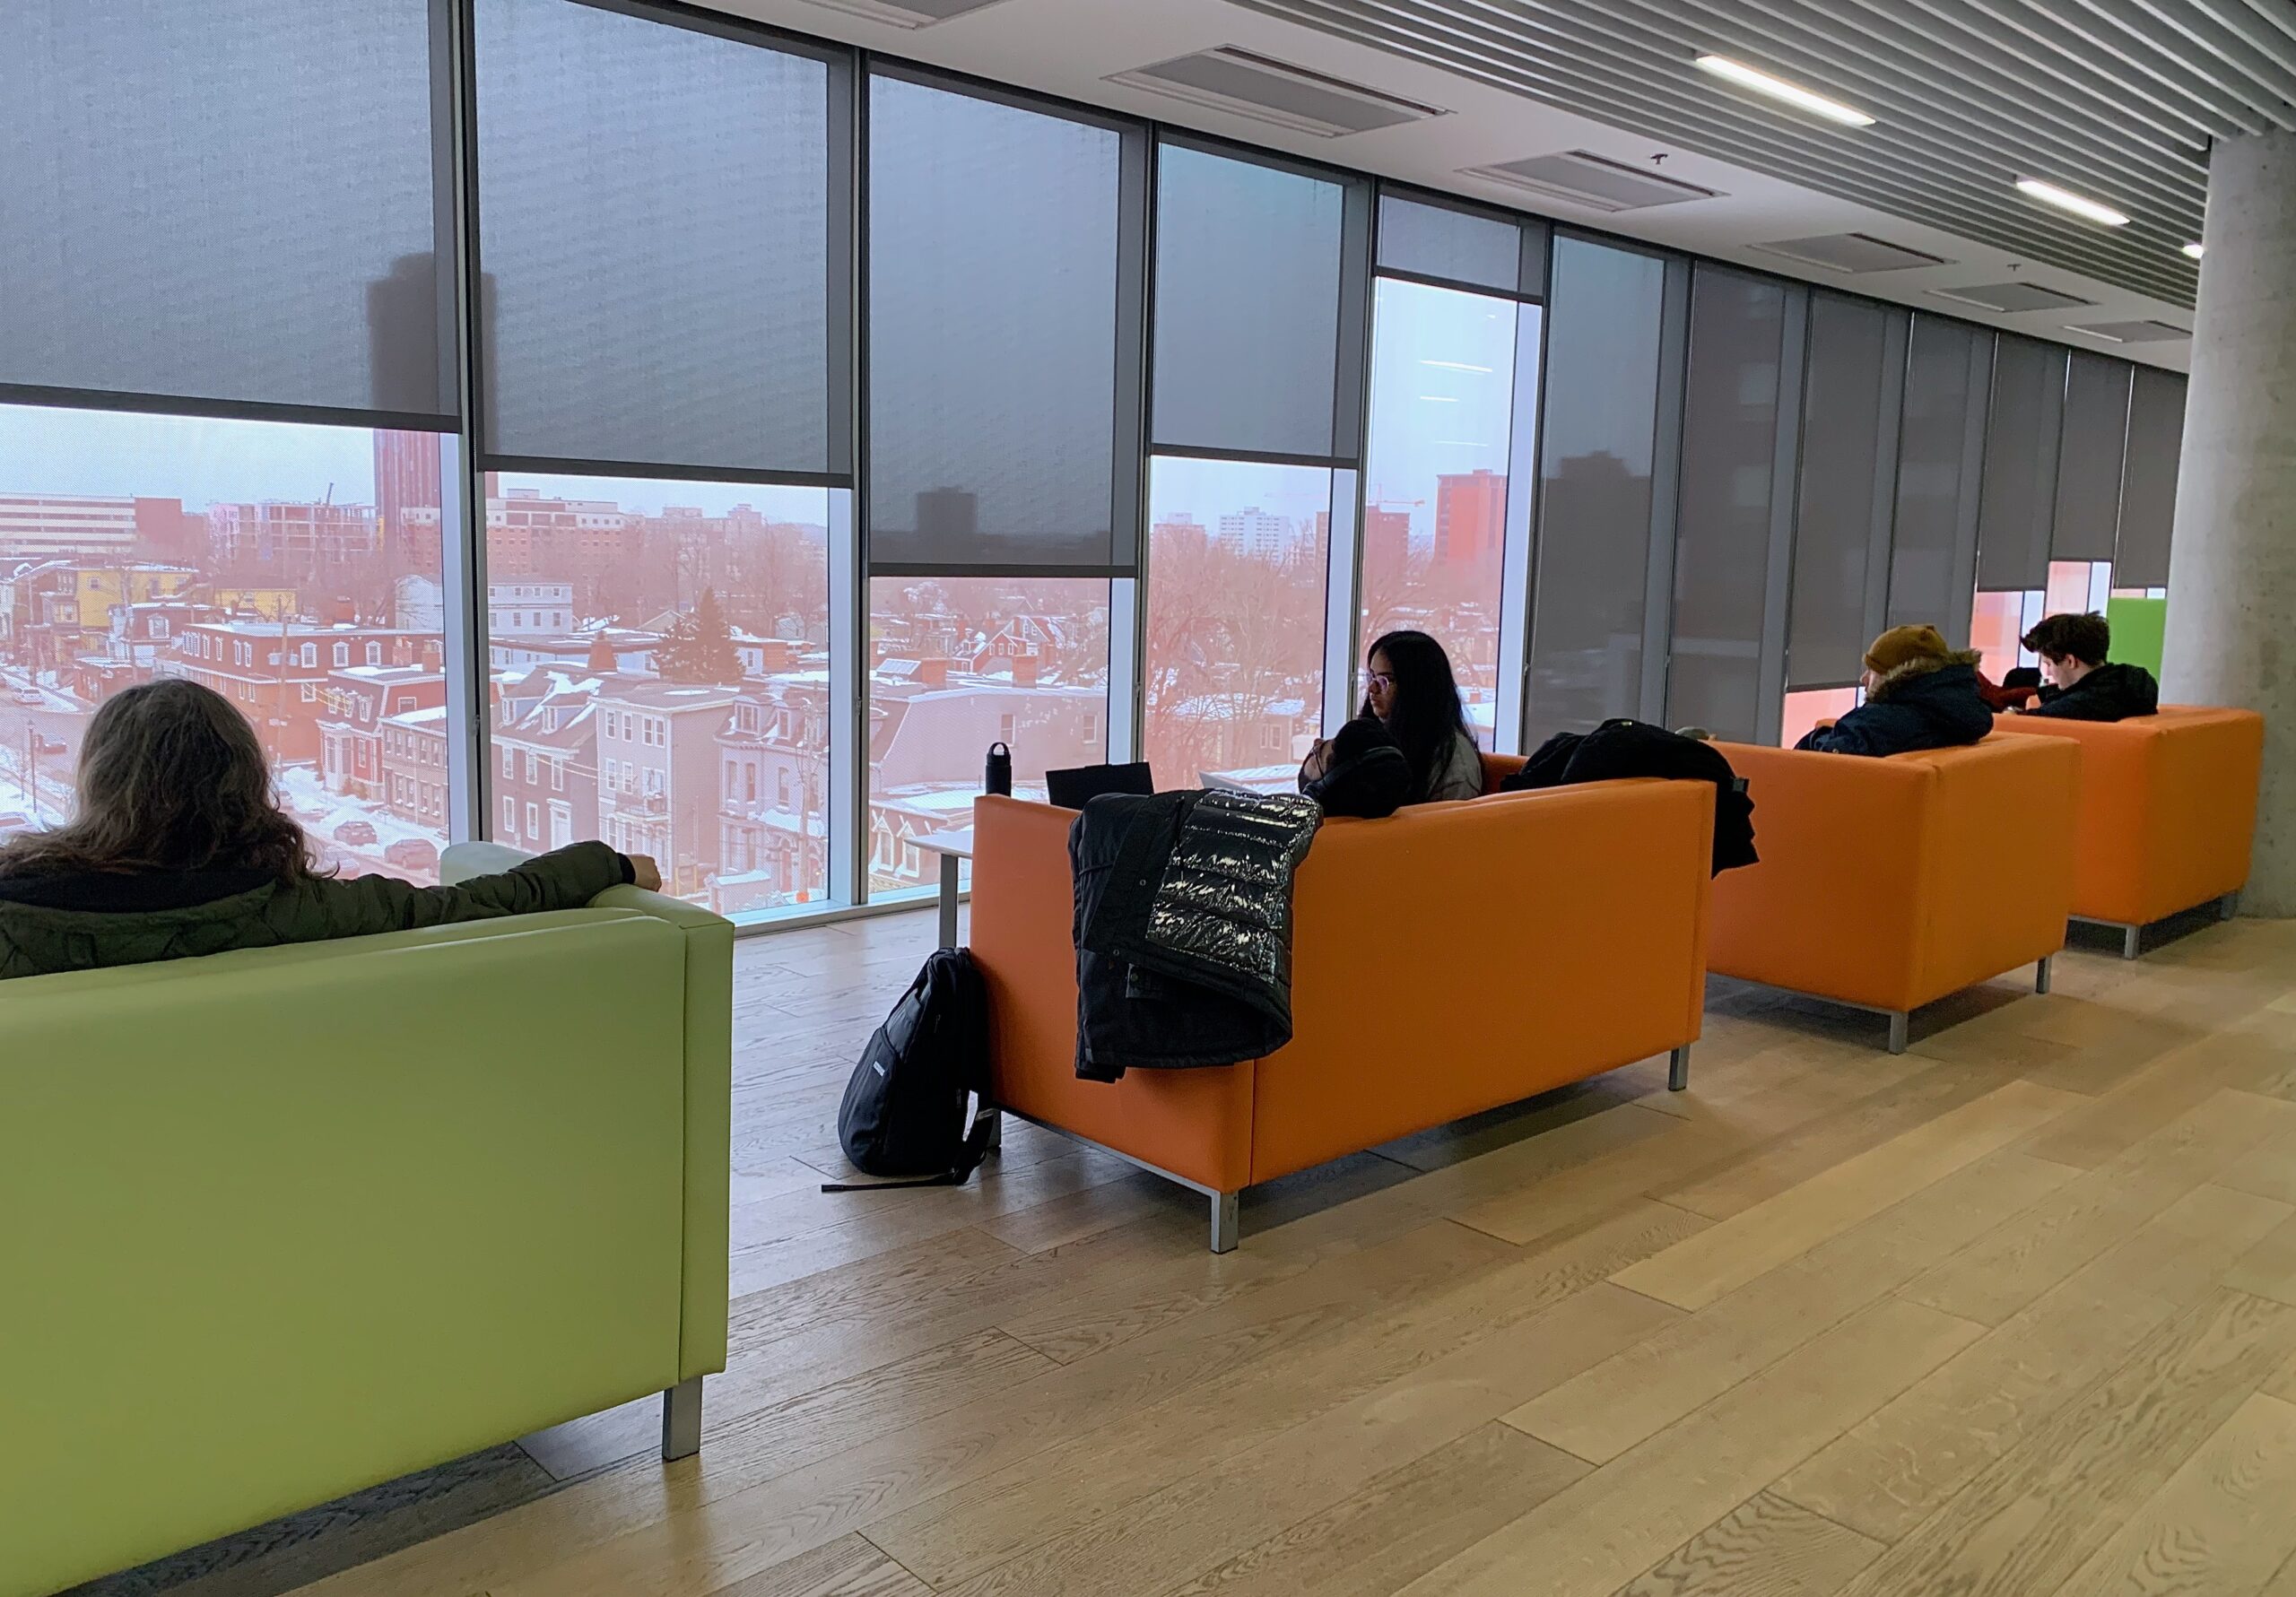 Four people sit on orange and green chairs near a window at the Halifax Central Library